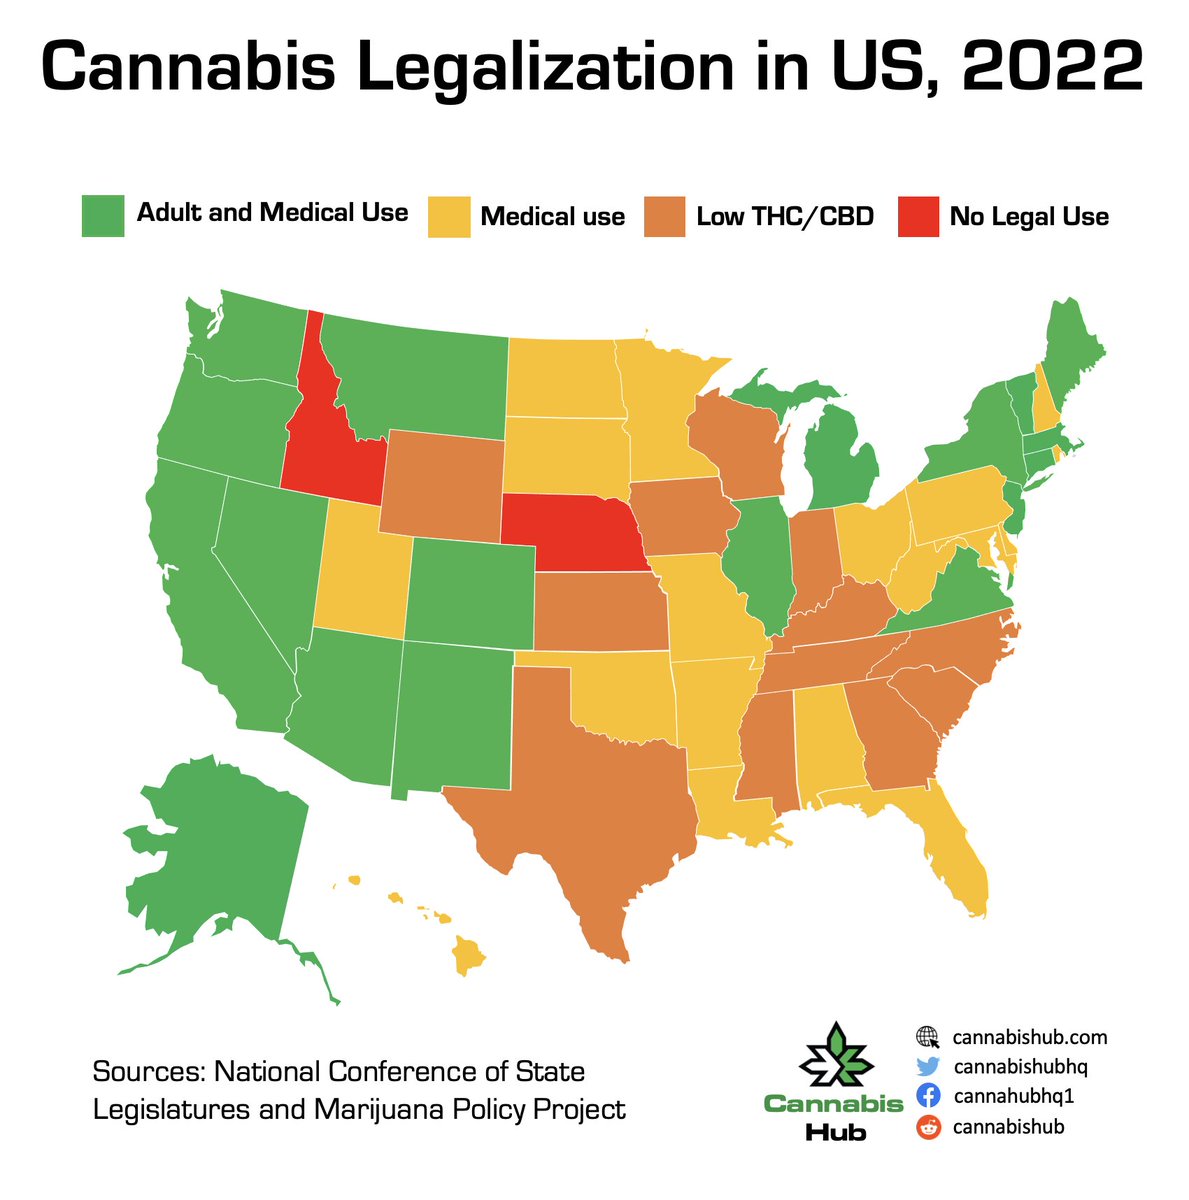 An up-to-date map of #cannabis legalization in the United States

#law #justice #legalsystem #reform #marijuiana #hemp #sativa #indica #mmj #MOREAct #SAFEAct #StatesReformAct #US #UnitedStates